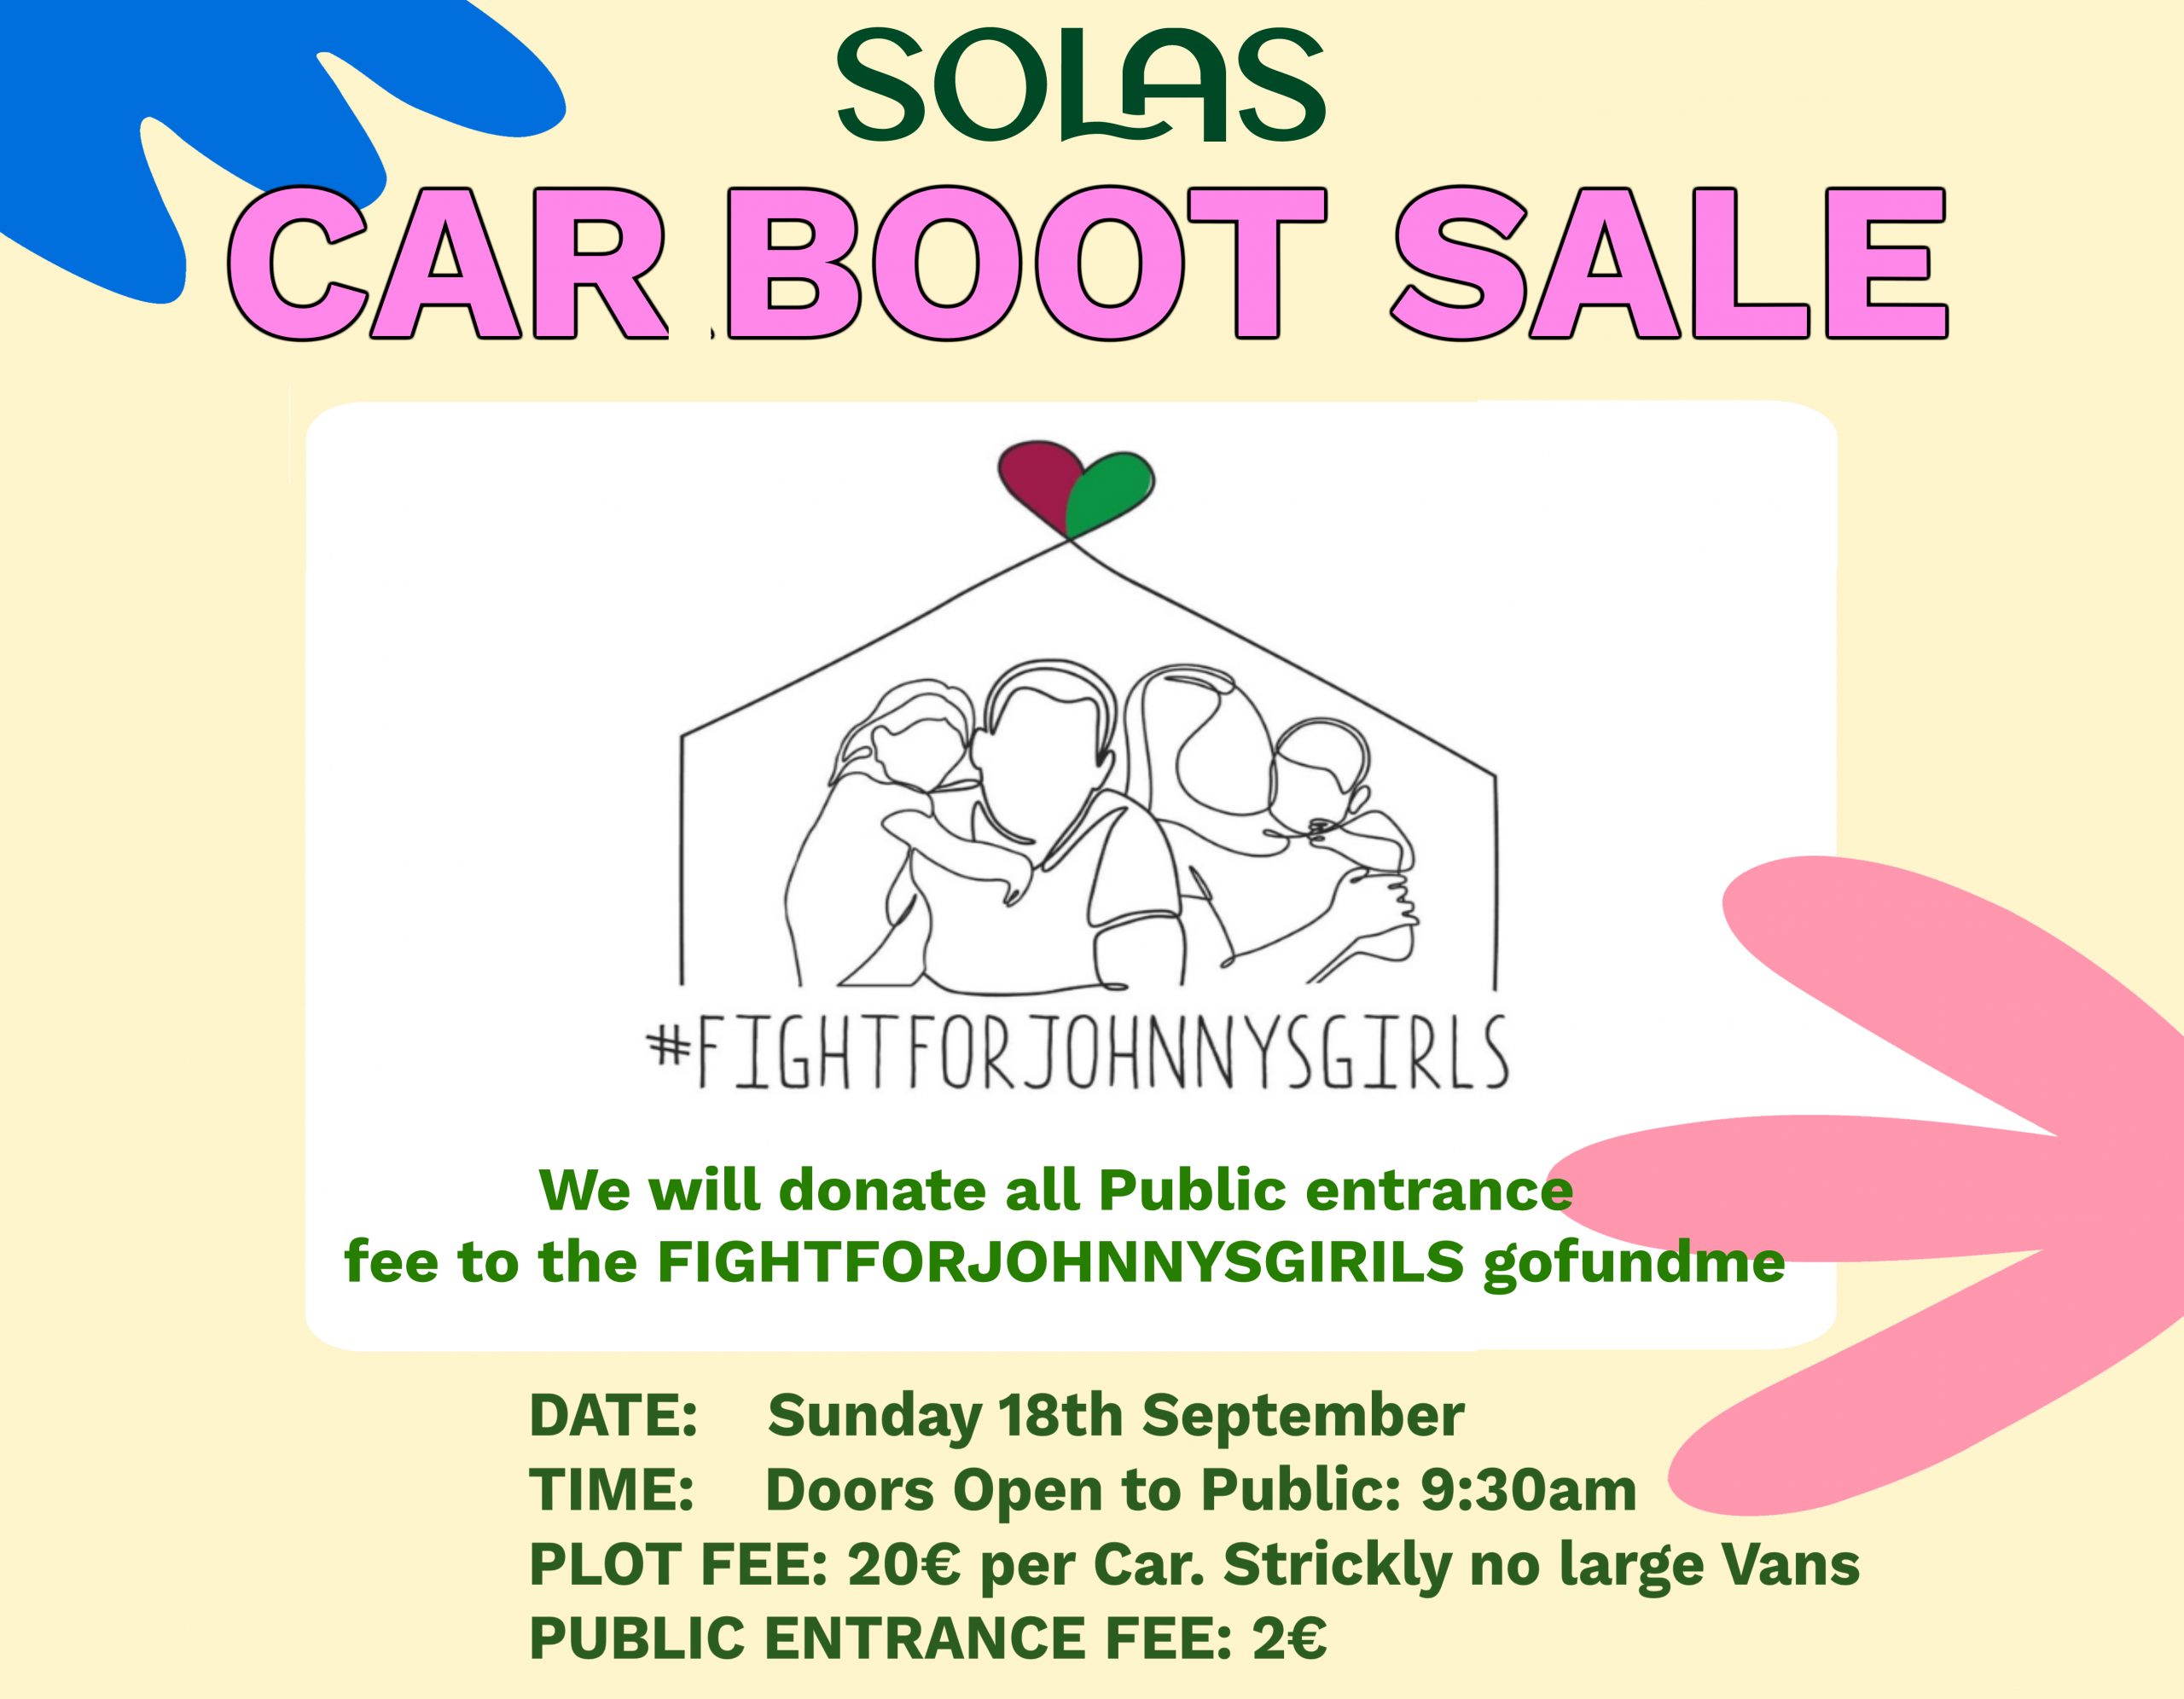 SOLAS Car Boot Sale this September